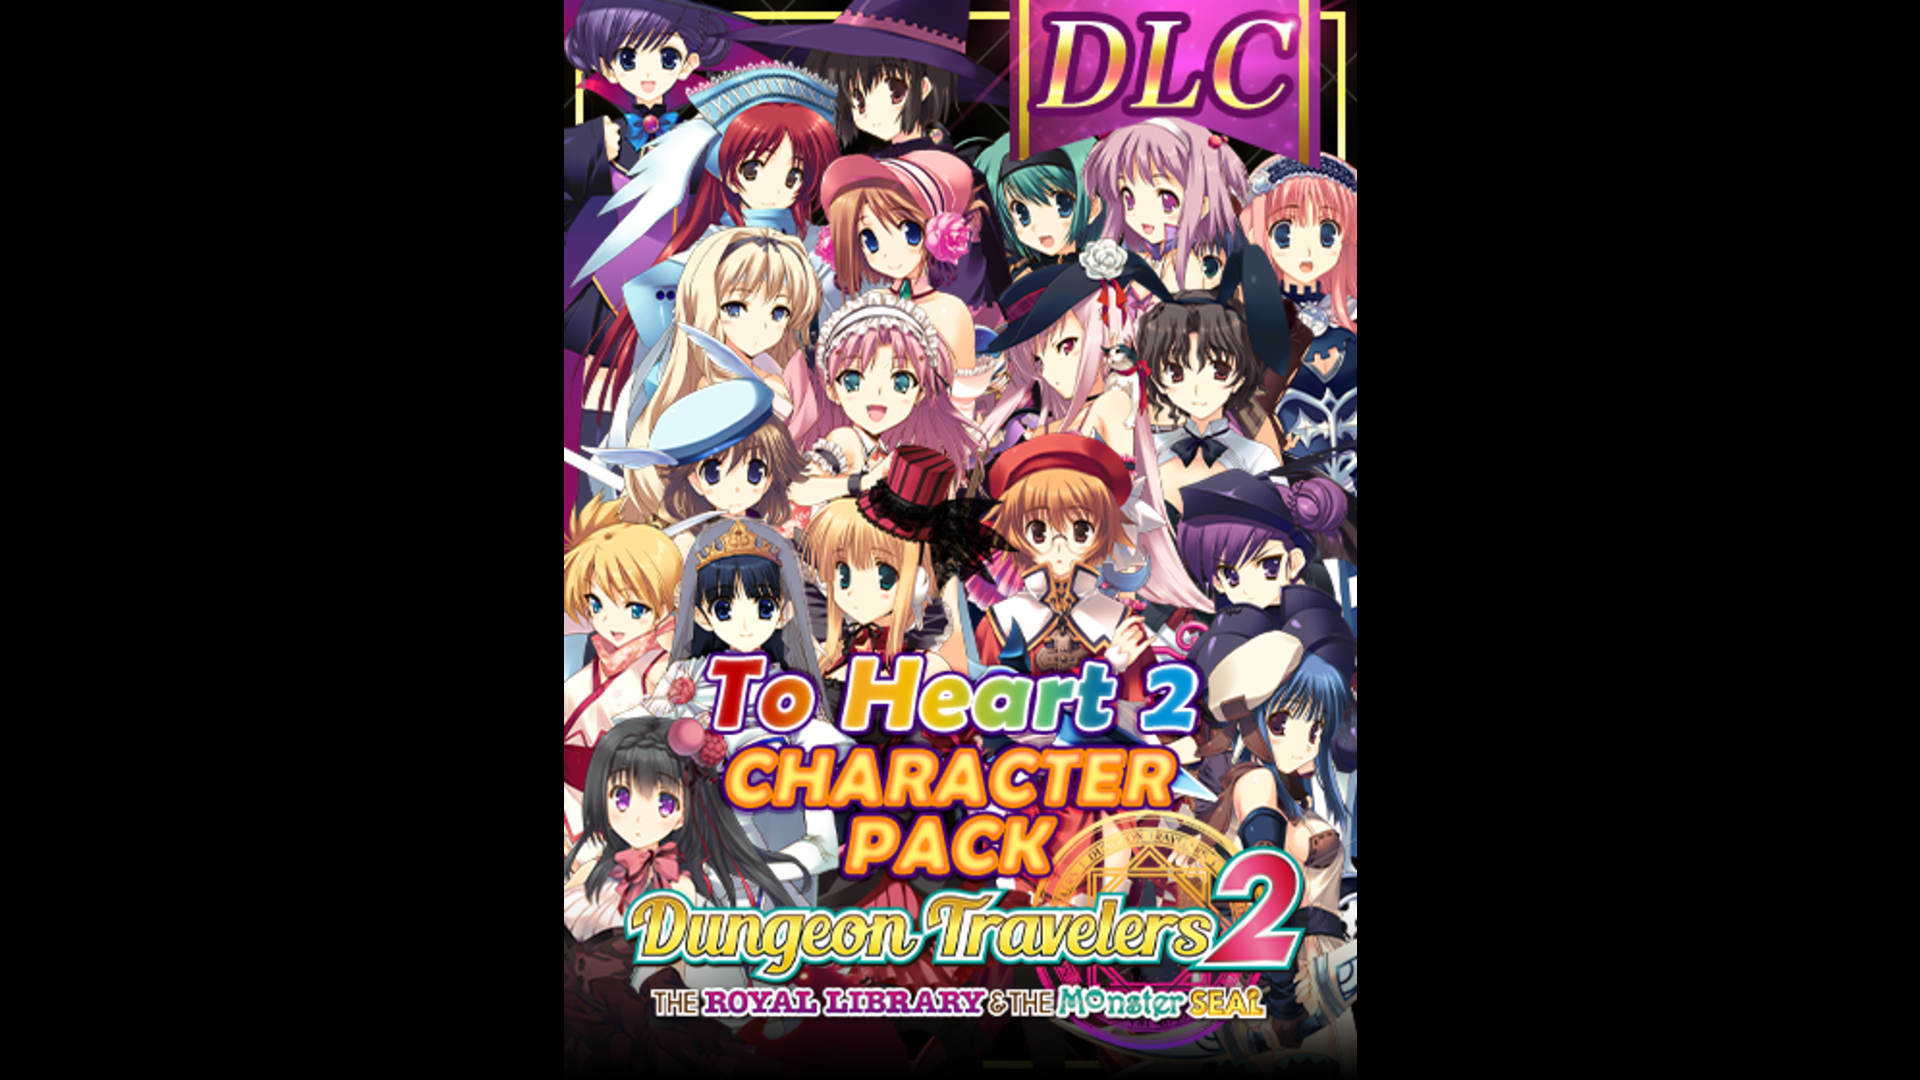 DLC - To Heart 2 Character Pack (Dungeon Travelers 2) - RPG - 1